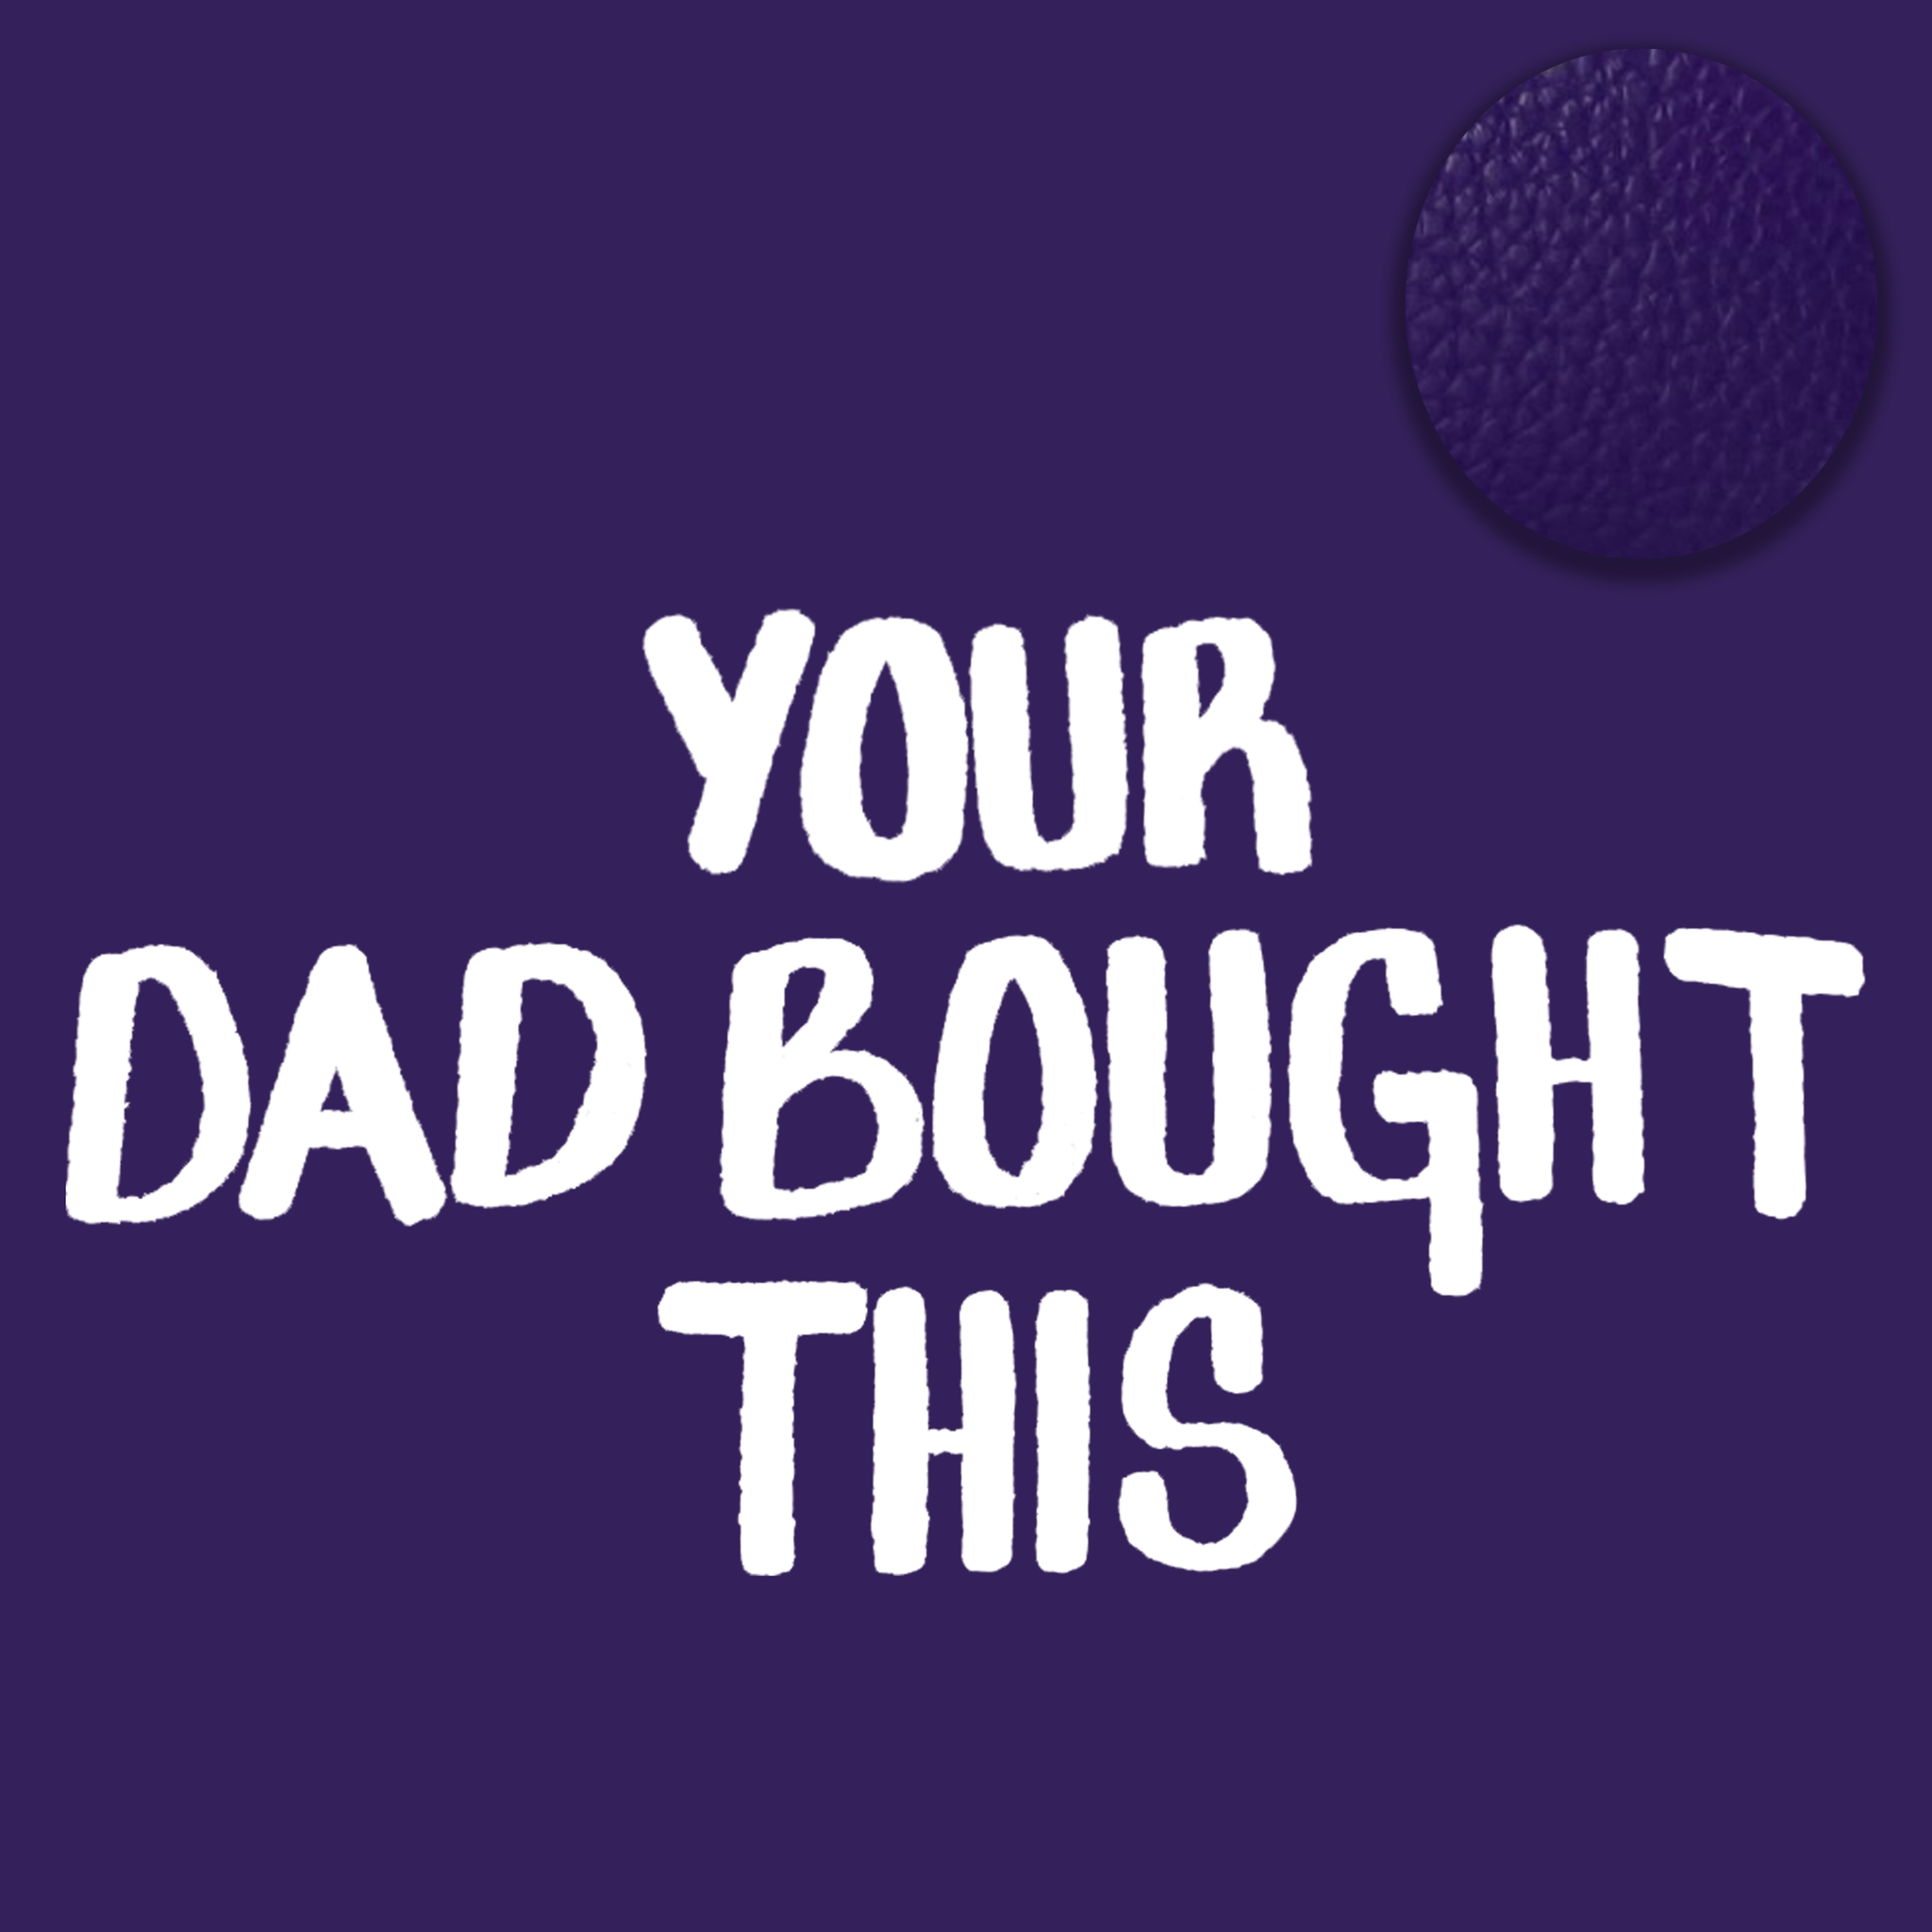 Your Dad Bought This | August